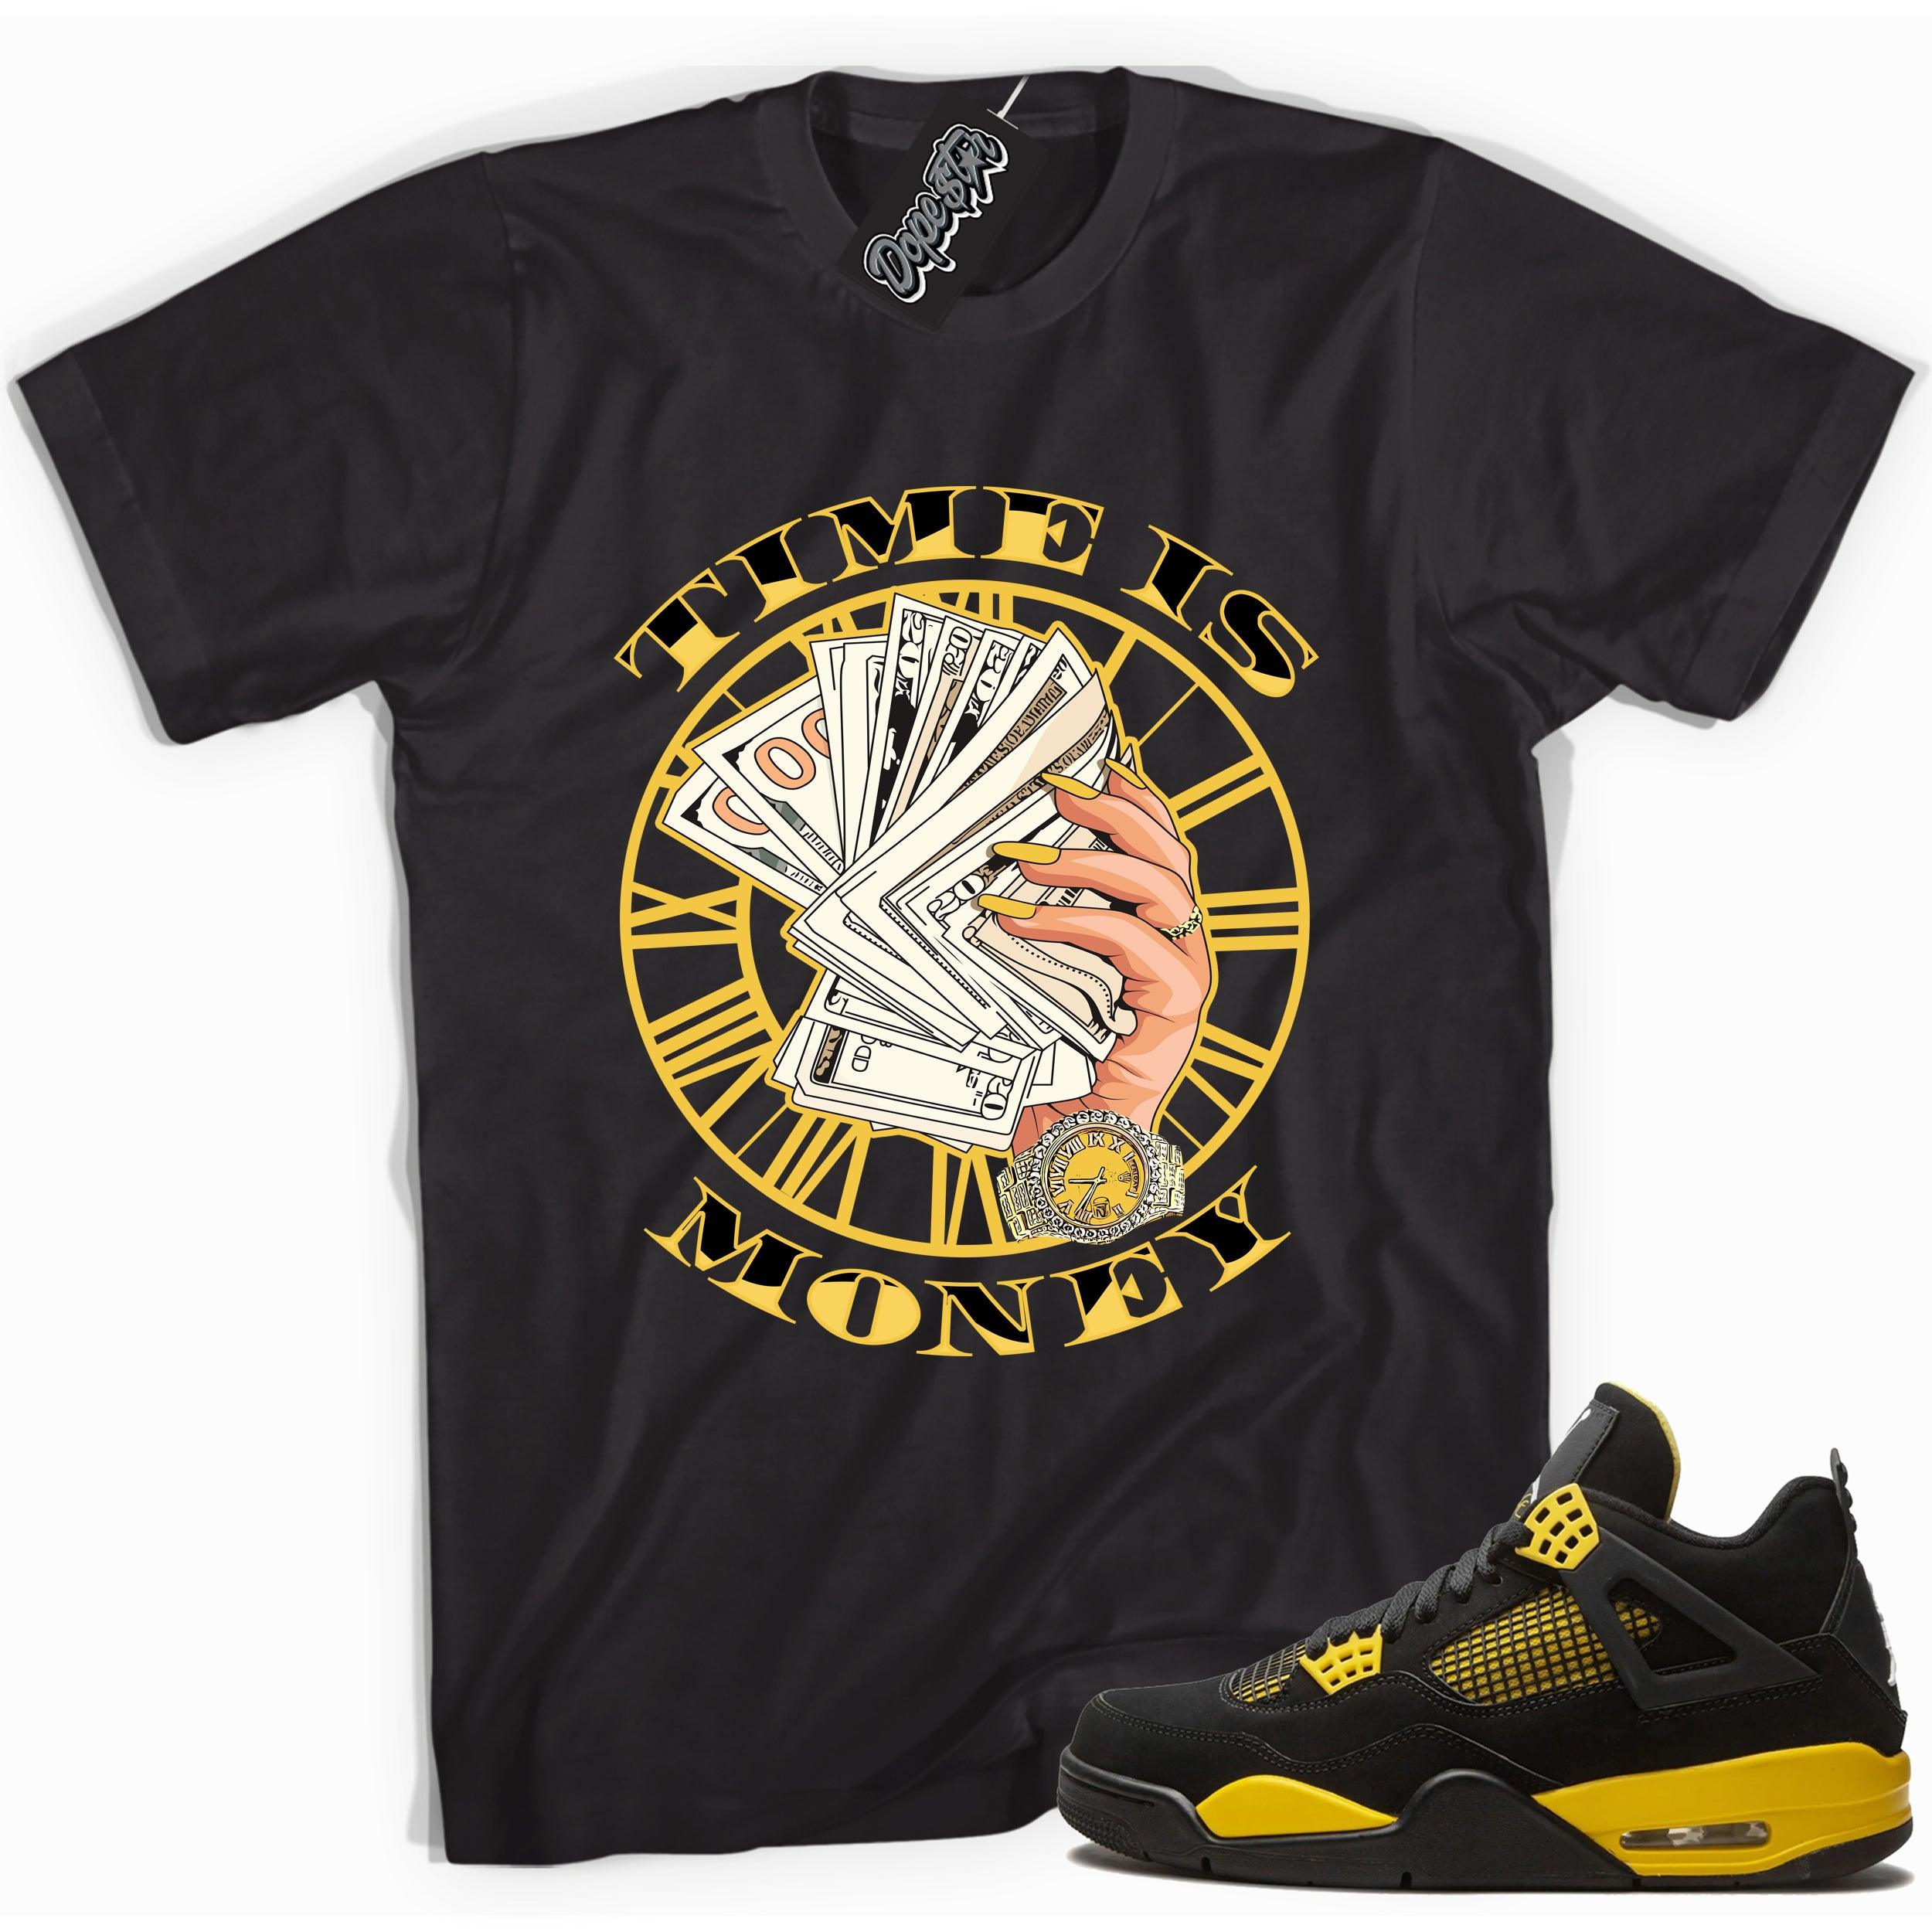 Cool black graphic tee with 'time is money' print, that perfectly matches  Air Jordan 4 Thunder sneakers